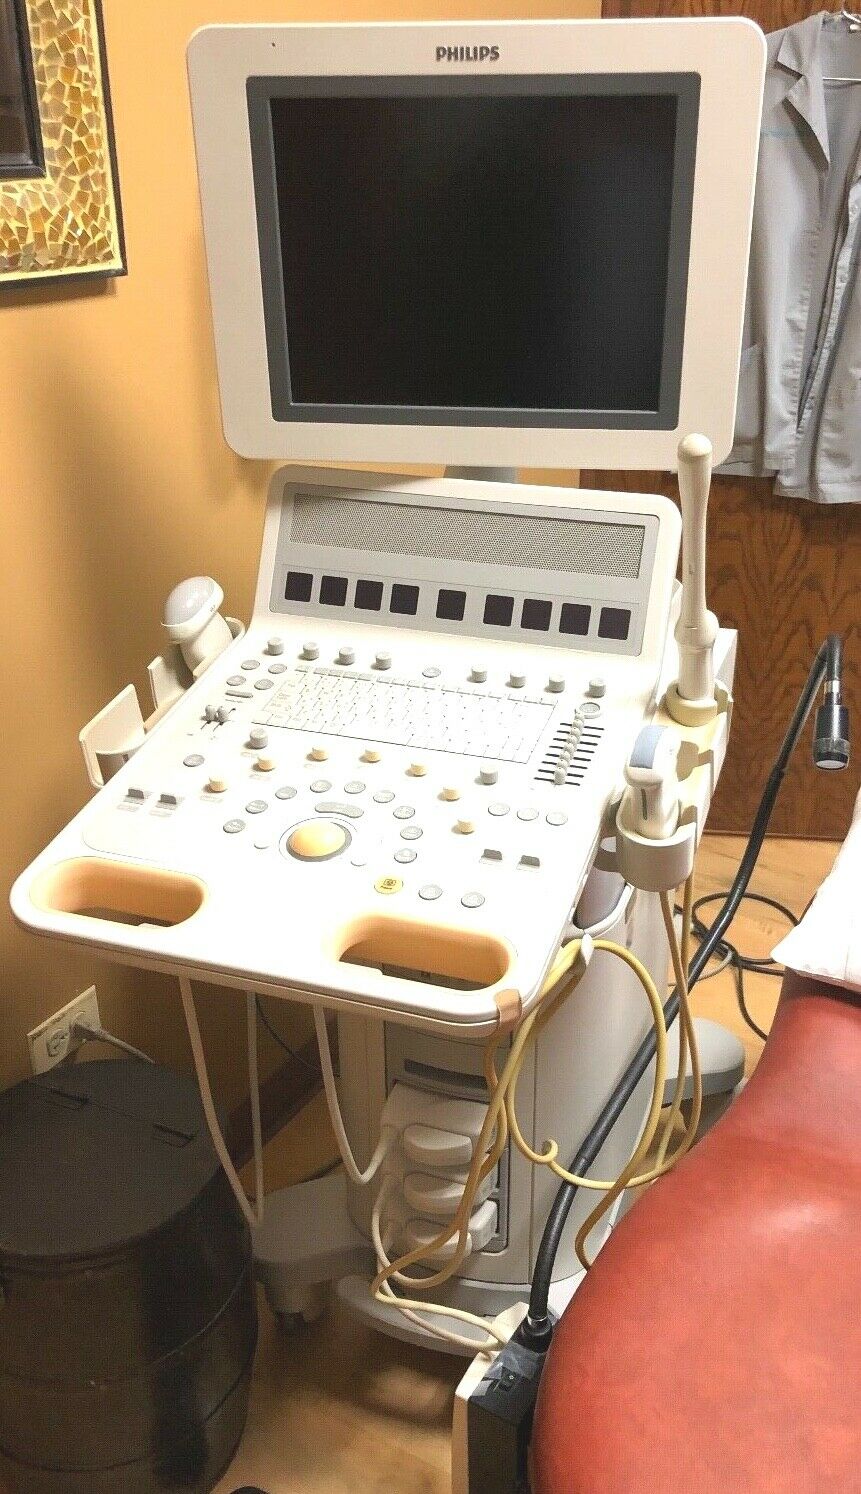 Philips HD15 Ultrasound system